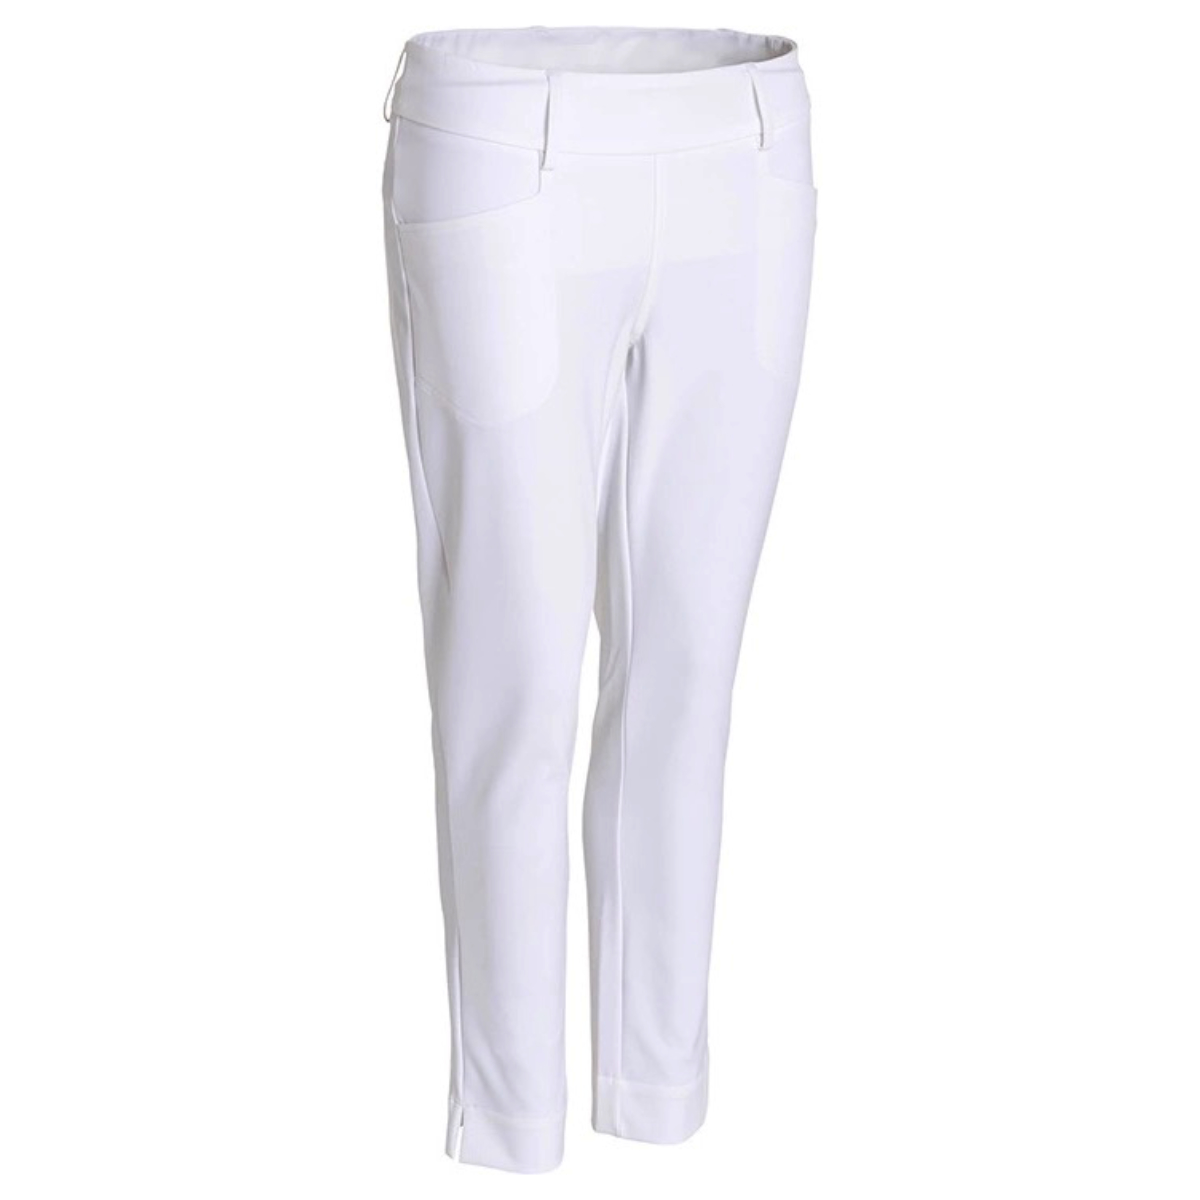 Abacus Ladies Grace 7/8 Trousers White